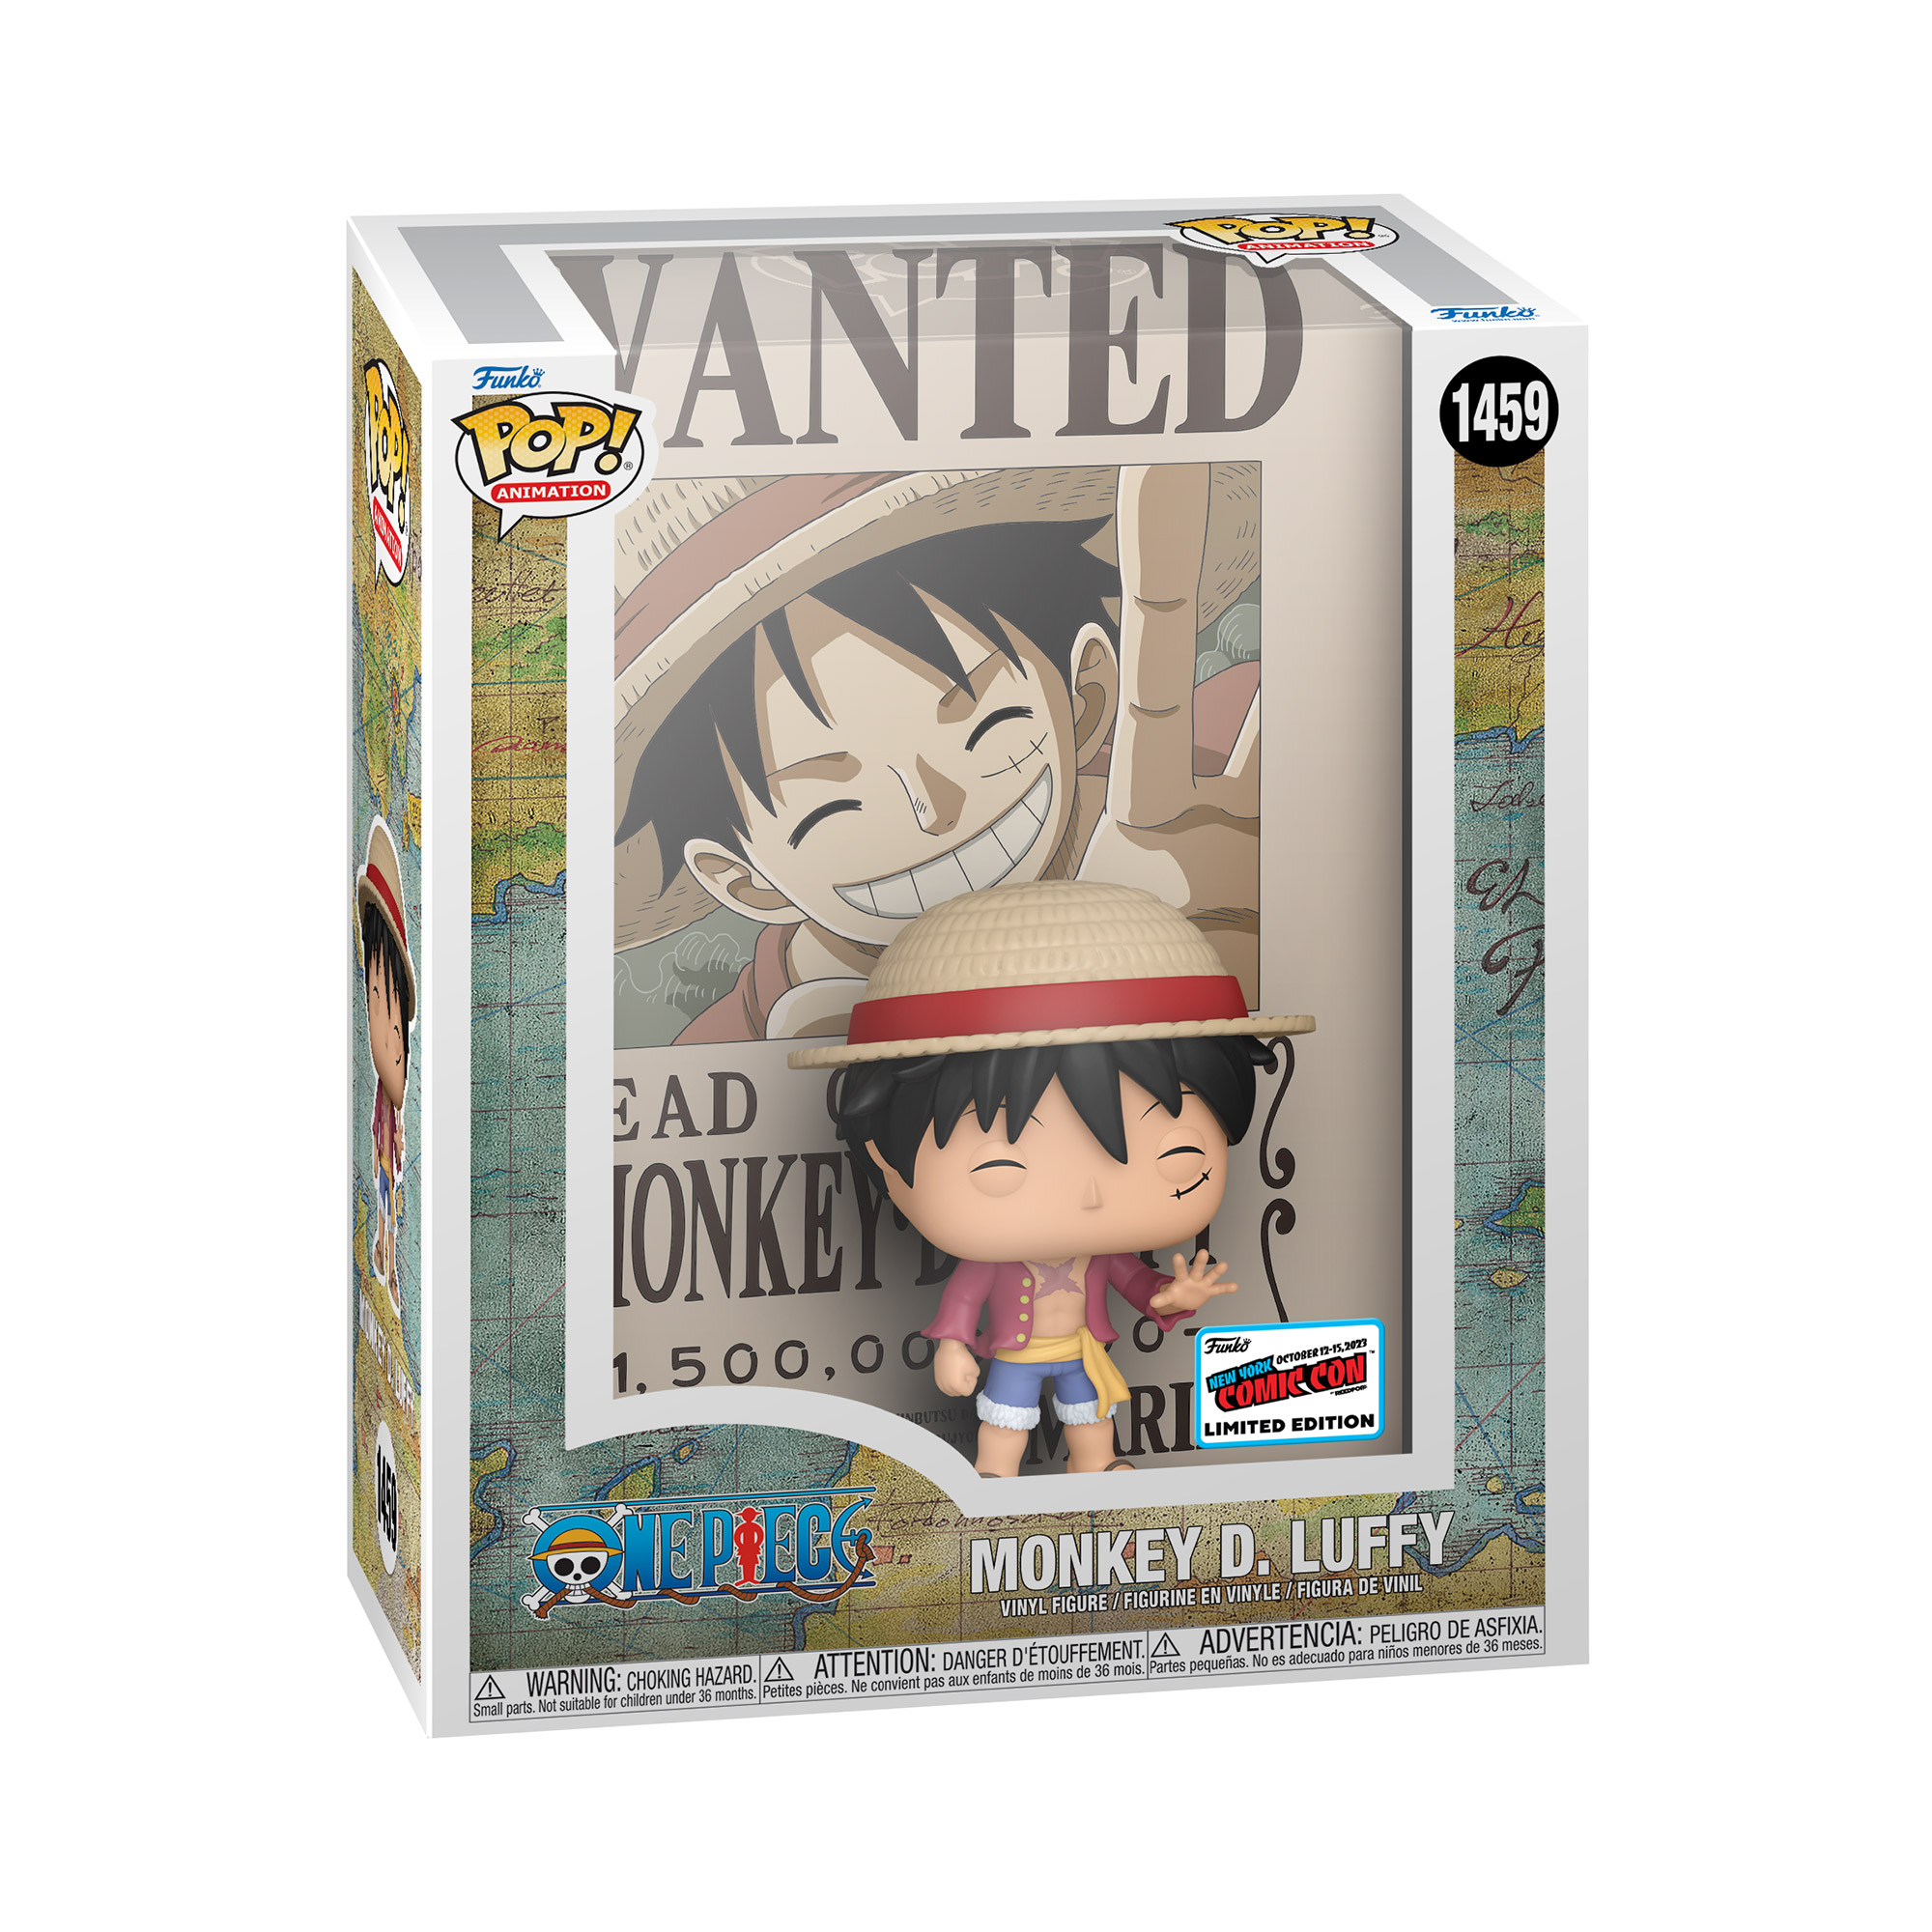 NYCC exclusive Pop! Poster of Pop! Monkey D. Luffy with Wanted Poster.